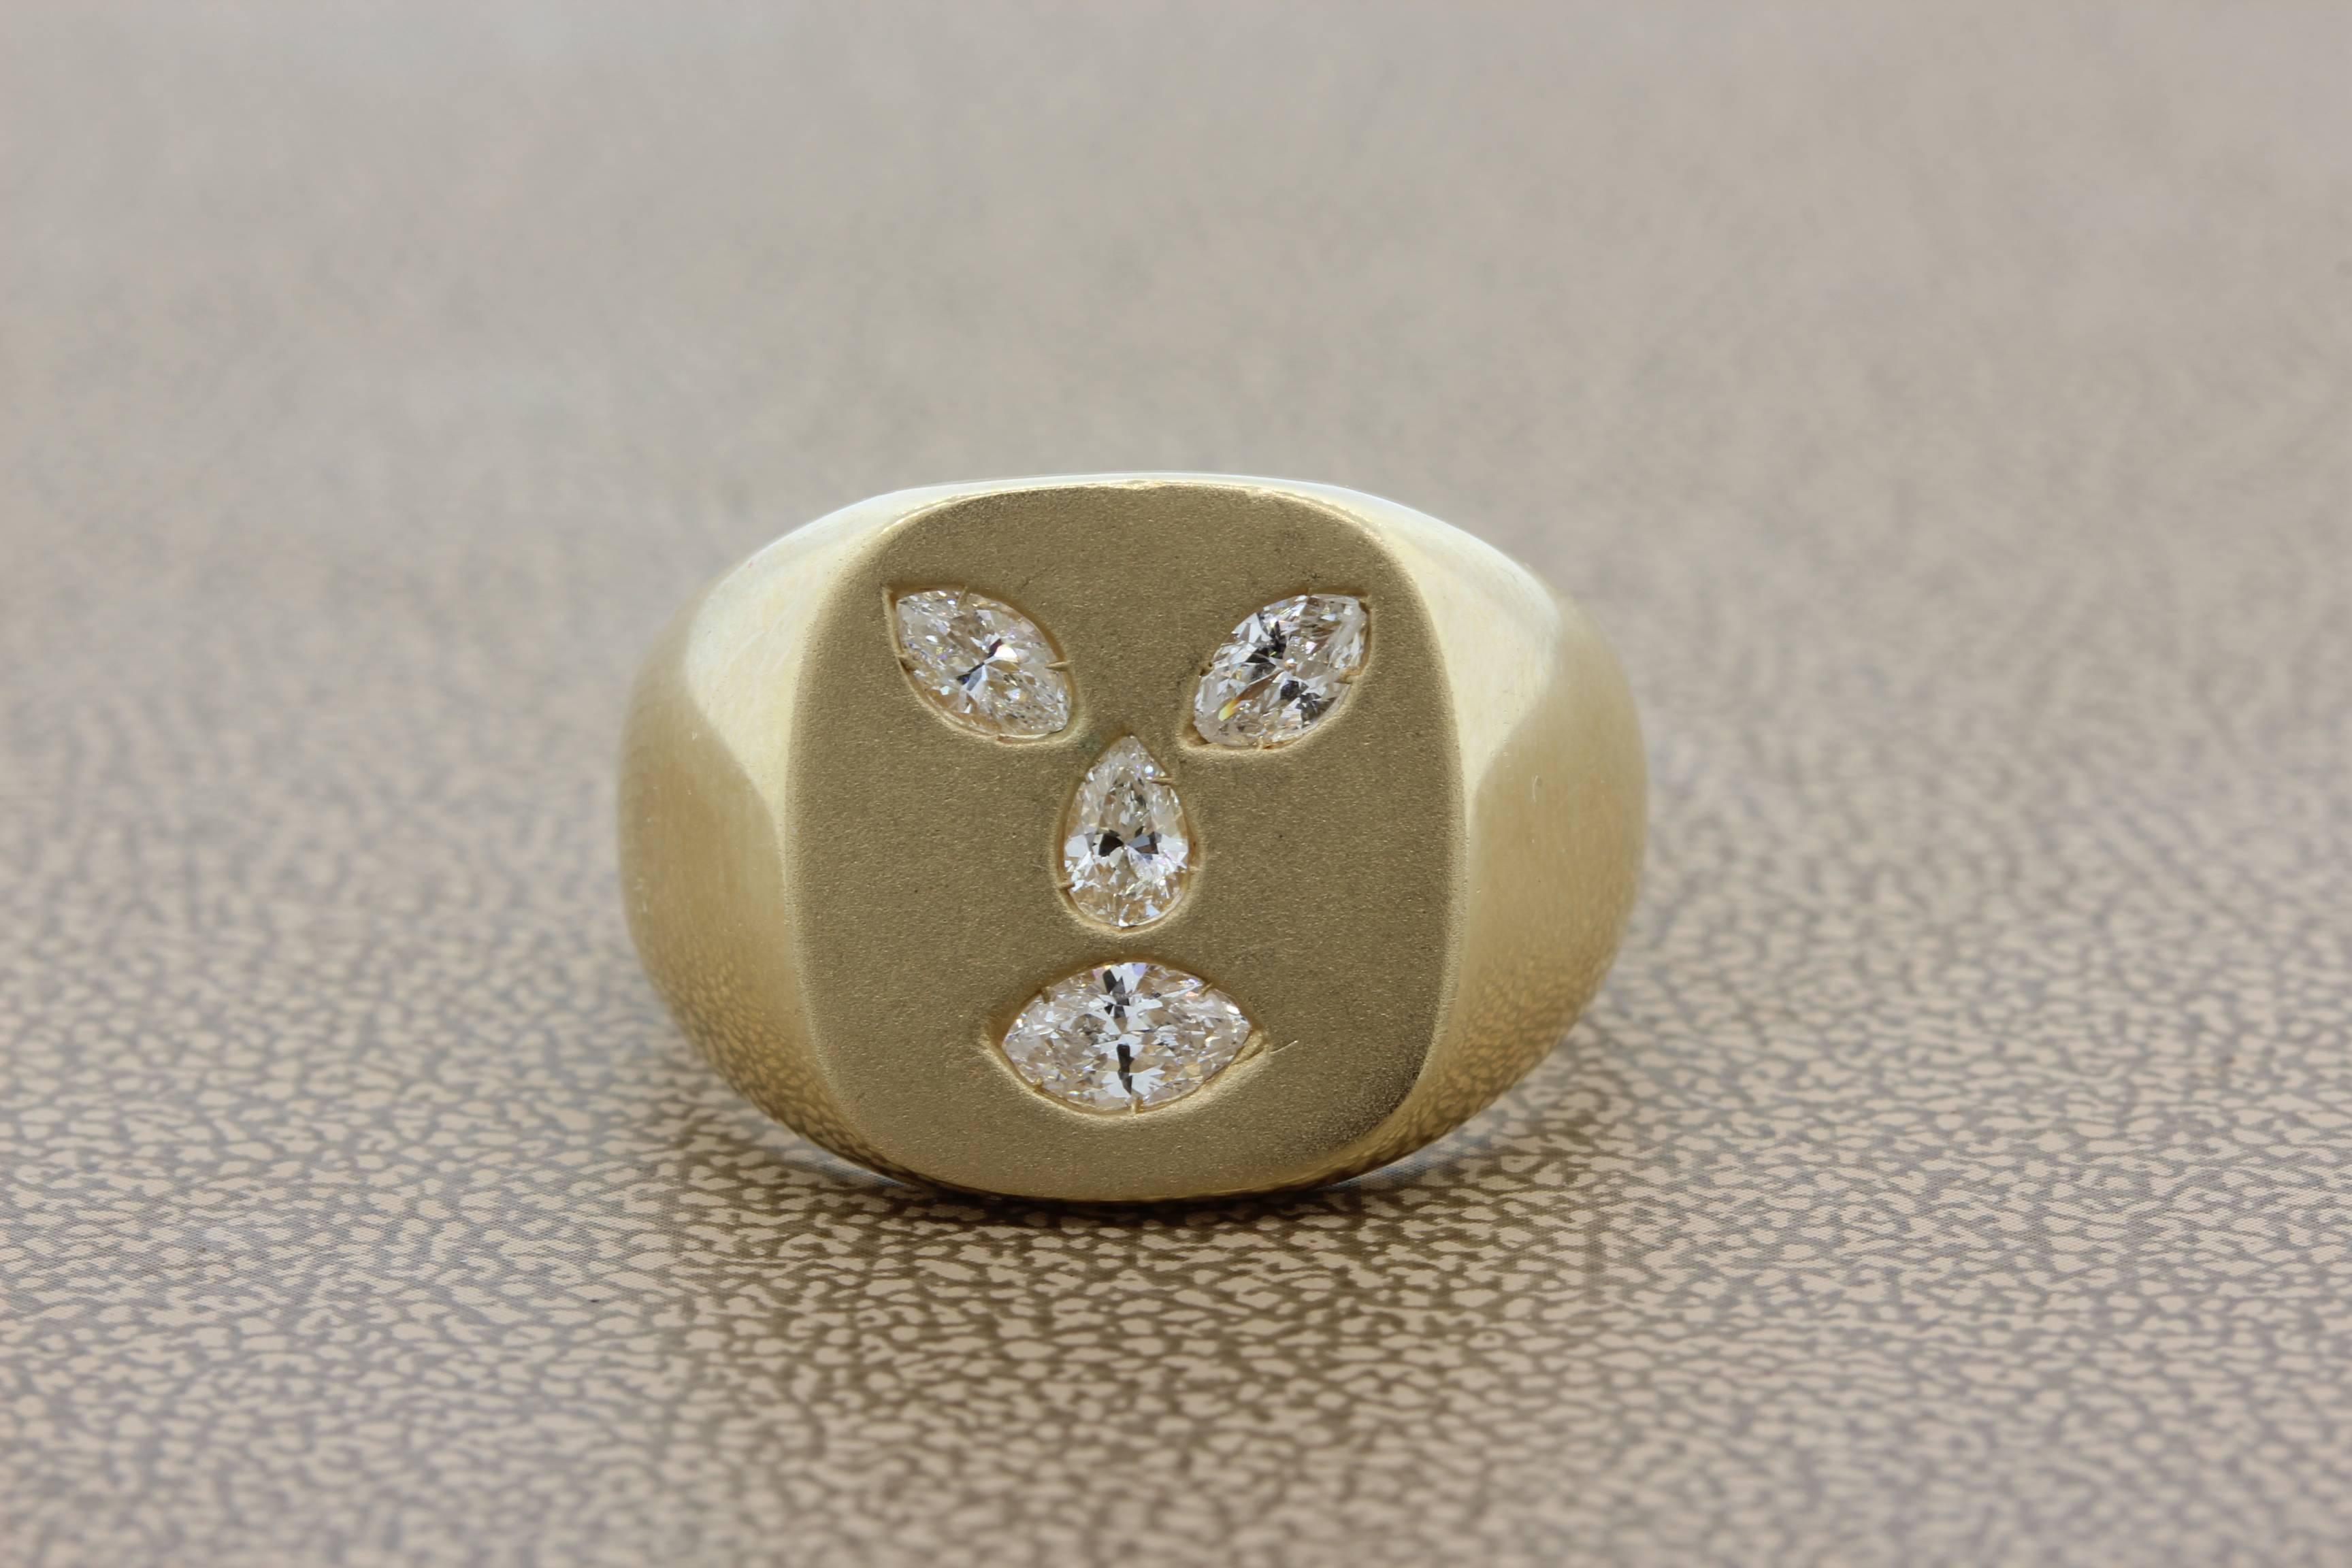 A unique ring featuring 4 diamonds, 1 pear cut and 3 marquise, set in 14 karat yellow gold. The 4 diamonds are all VS quality and weight a total of 0.50 carats.

Size 9 ¾ 
